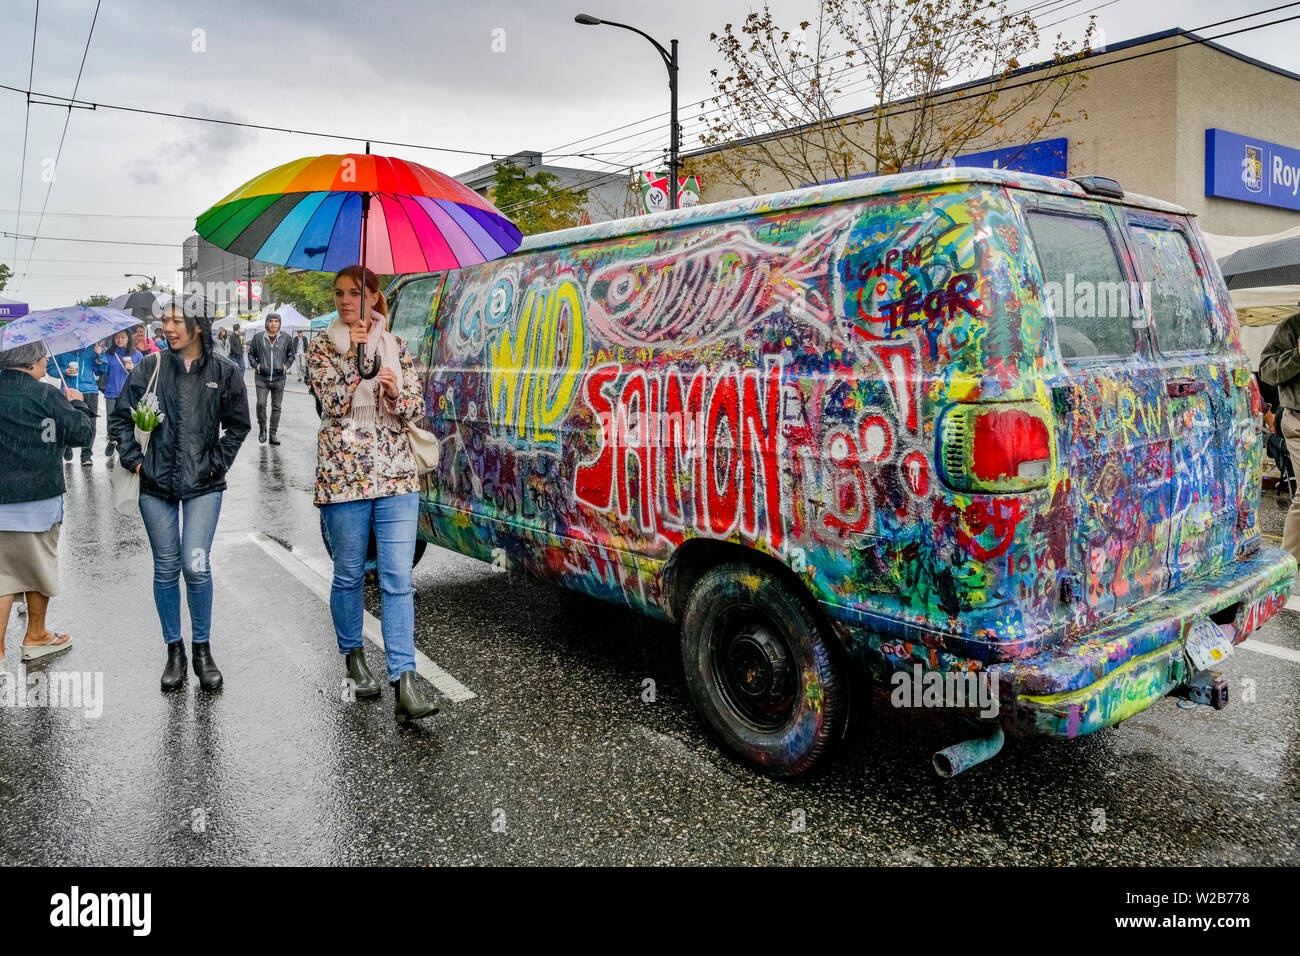 Wildly painted Hippie style van, Car Free Day, Commercial Drive, Vancouver, British Columbia, Canada Stock Photo